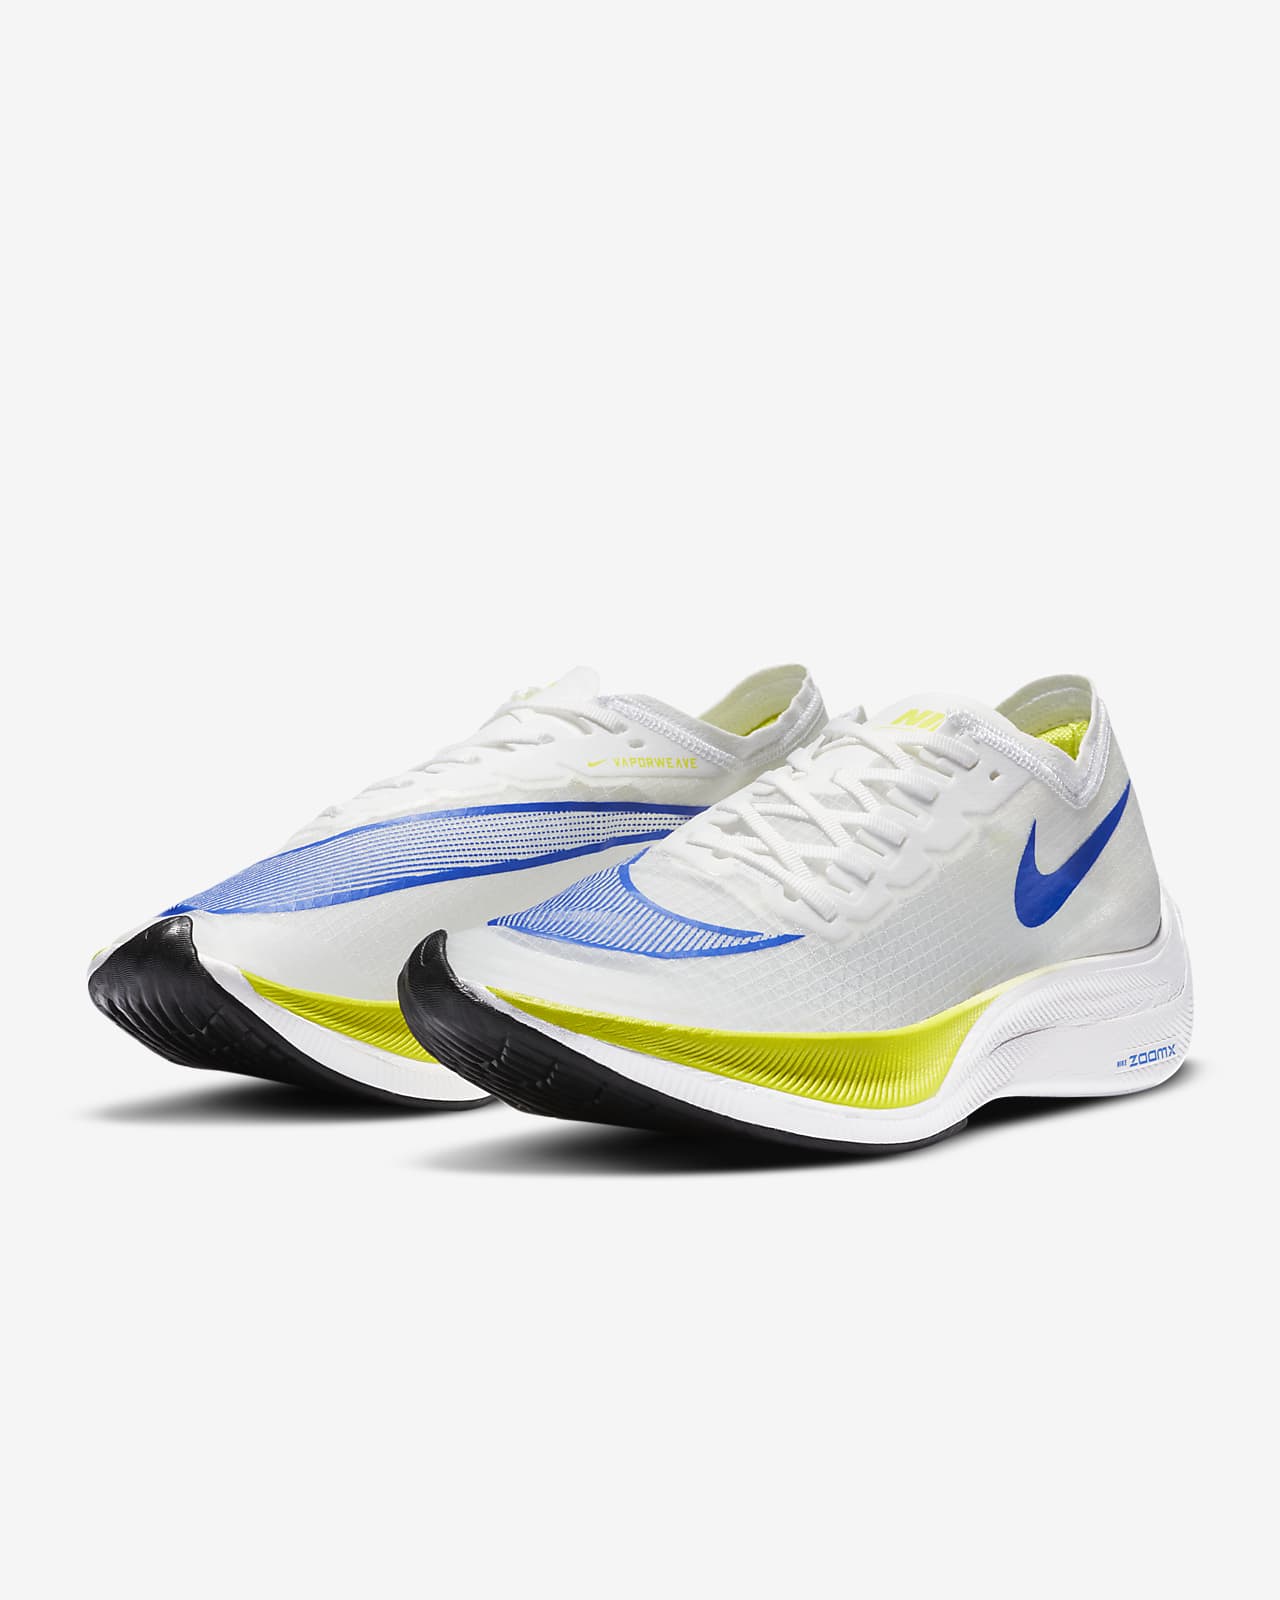 nike running shoes zoom x